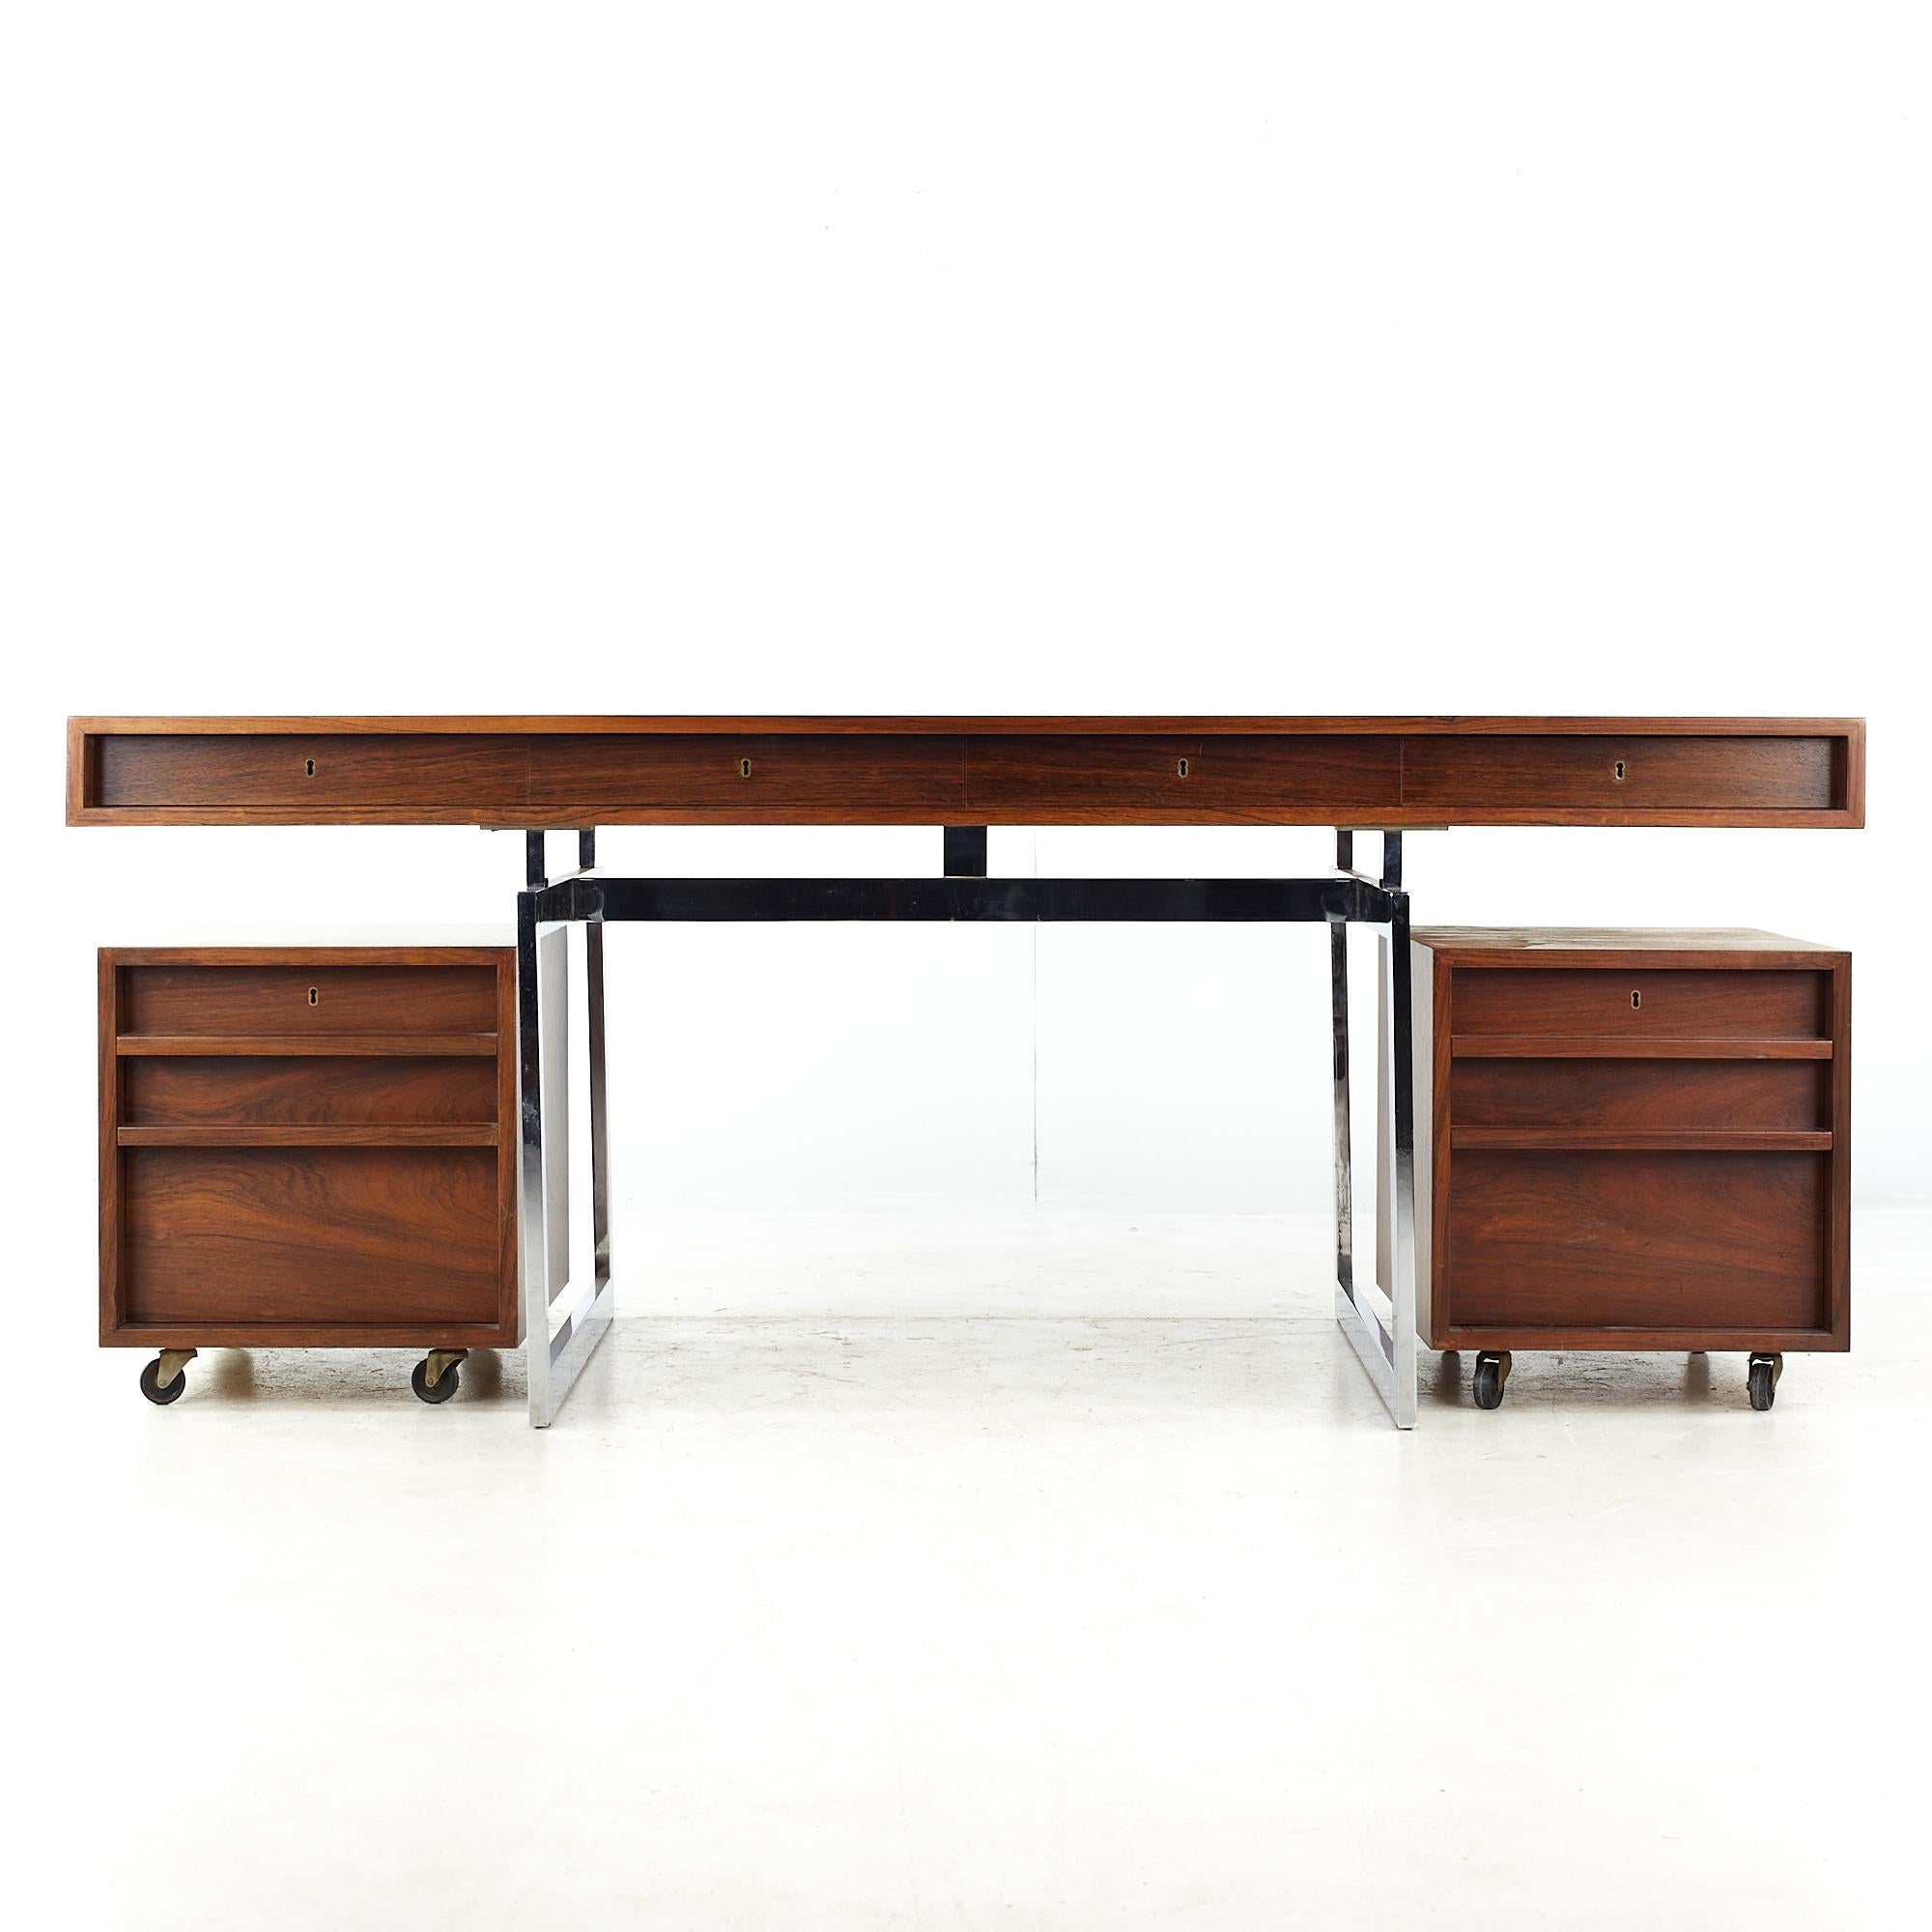 Bodil Kjaer for E. Pedersen & Son Mid Century Brazilian Rosewood and Chrome Desk

This desk measures: 72.75 wide x 38 deep x 28.75 high, with a chair clearance of 24.25 inches

All pieces of furniture can be had in what we call restored vintage